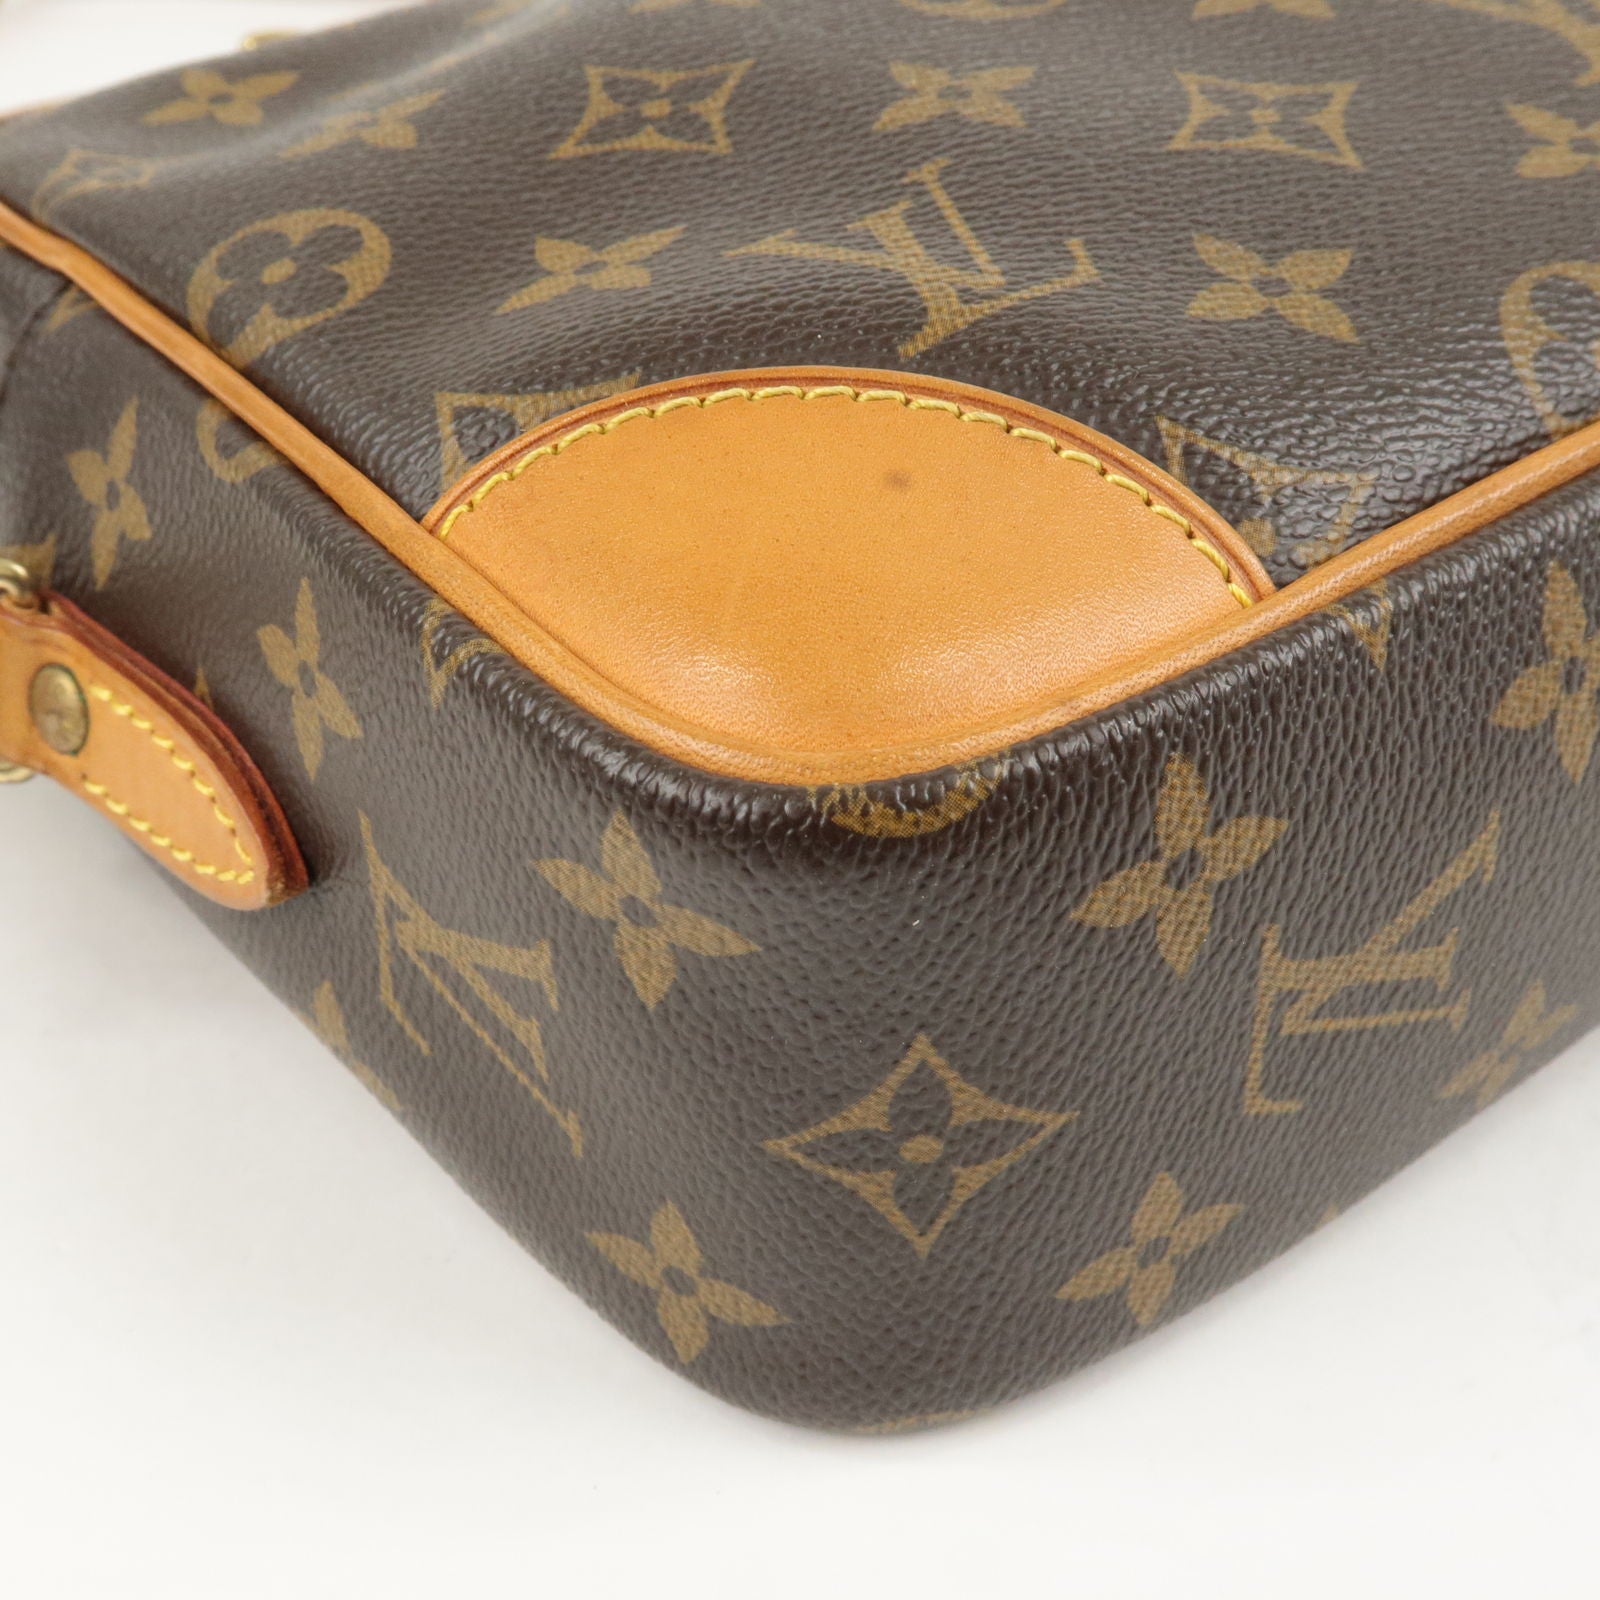 Pre-Owned Louis Vuitton Keepall Bandouliere 50 Women's and Men's Boston Bag  M45731 Monogram Shadow Leather Navy (Good) 